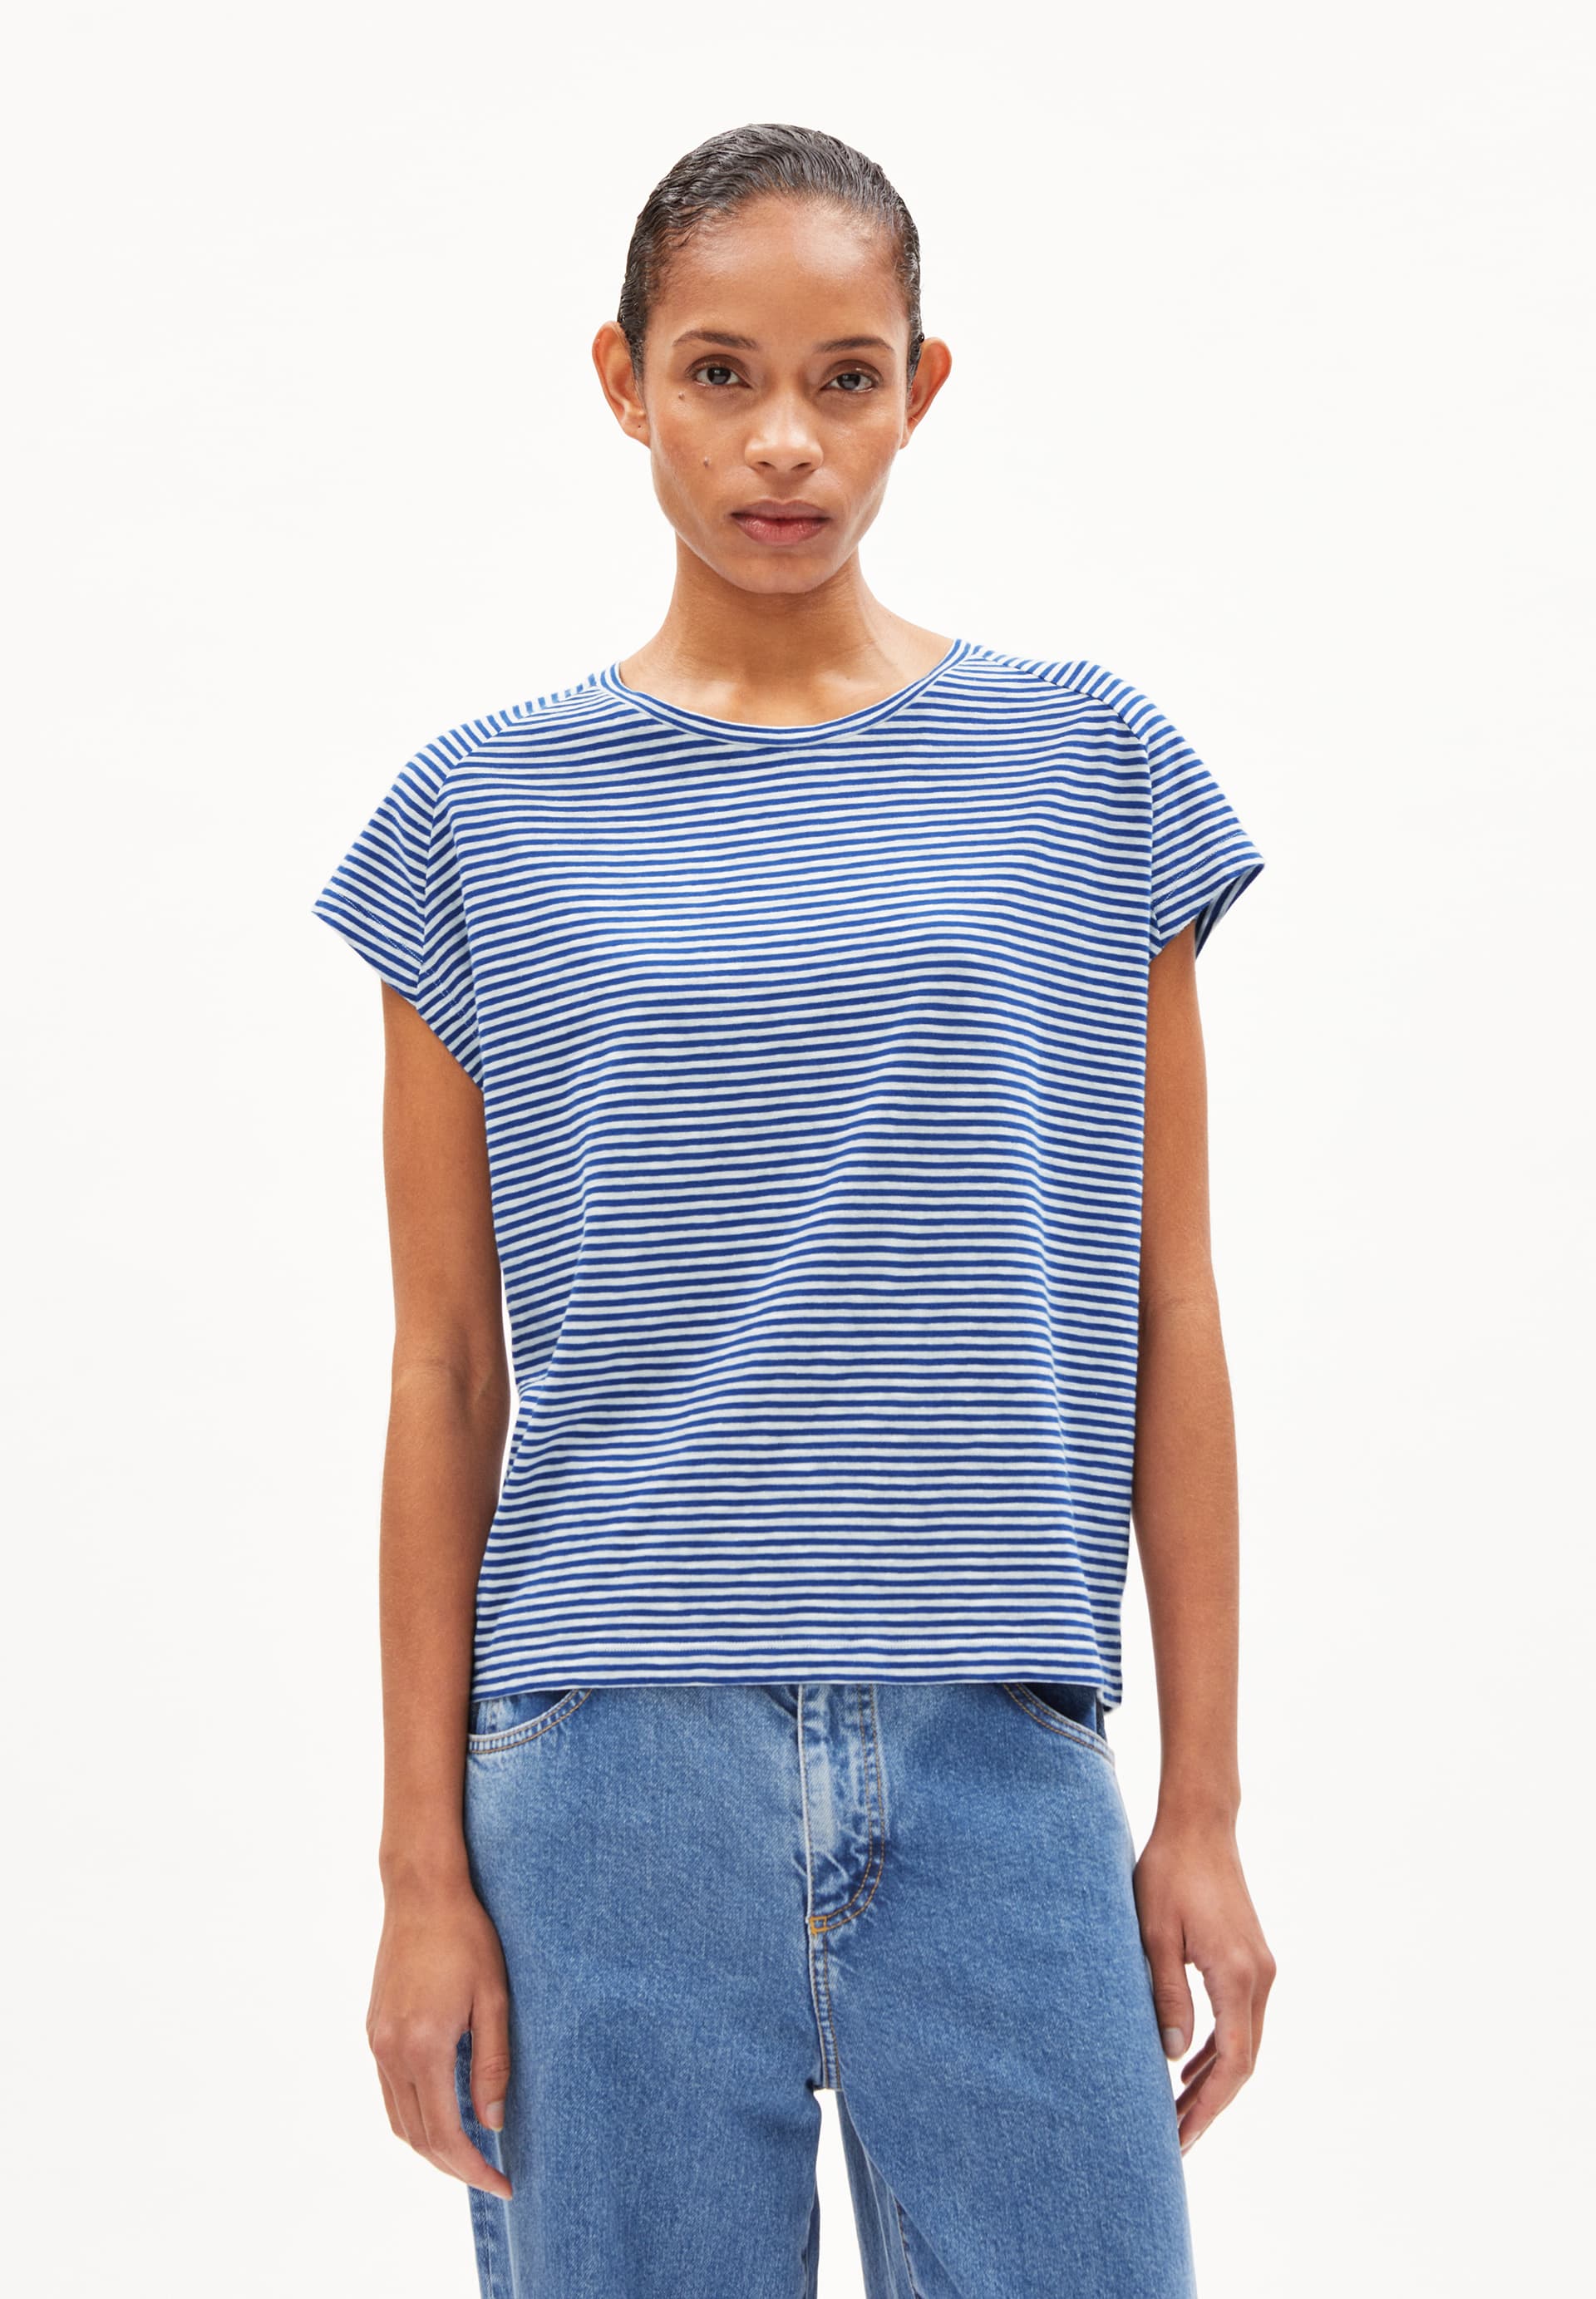 ONELIAA LOVELY STRIPES T-Shirt Loose Fit aus Bio-Baumwolle